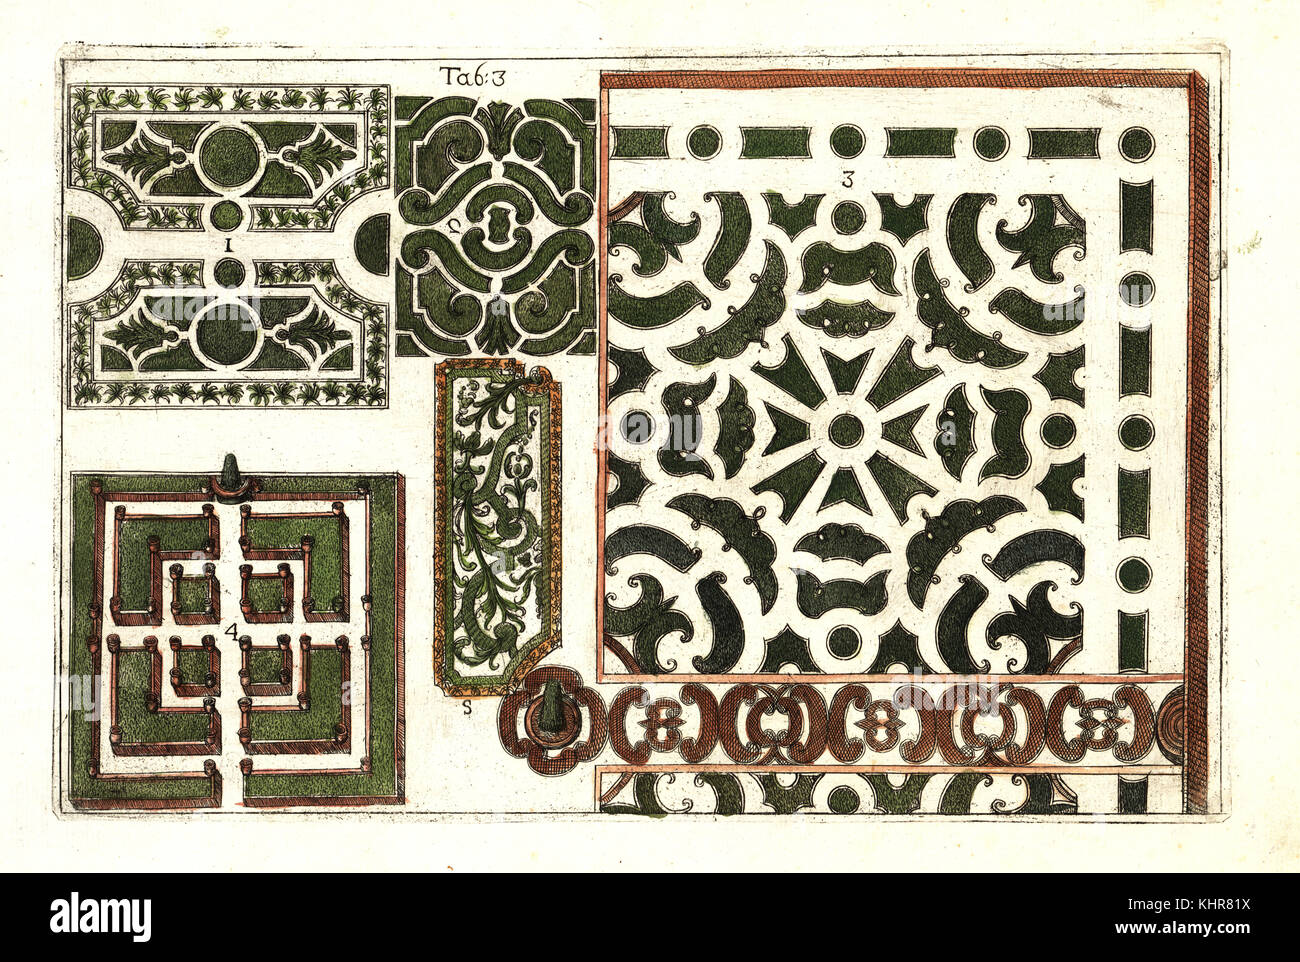 Plans for formal gardens, 18th century. Handcoloured copperplate engraving after Mario Cammerari from Professor Filippo Arena's La natura e cultura dei fiori fisicamente esposta (The nature and culture of flowers physically displayed), Palermo, Italy, 1771. Stock Photo